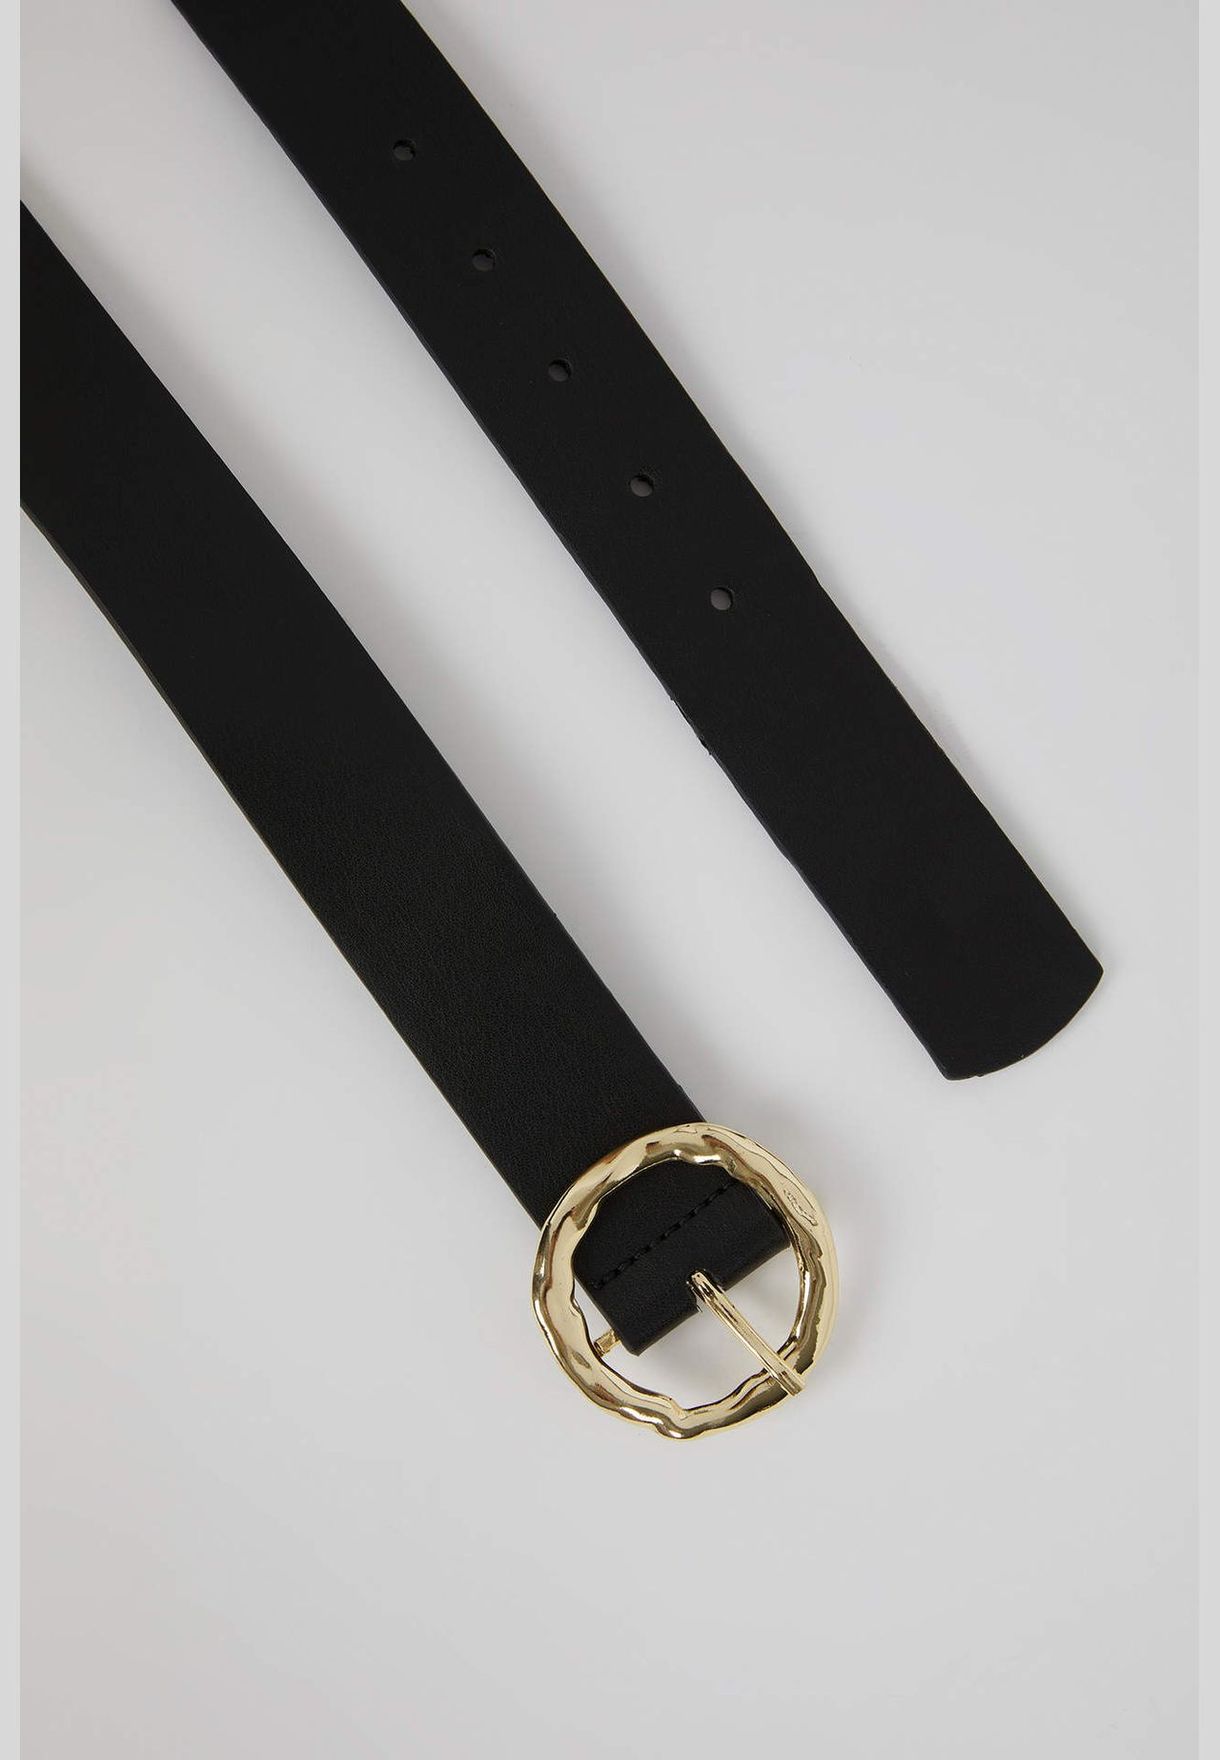 Faux Leather Belt with Metal Oval Buckle